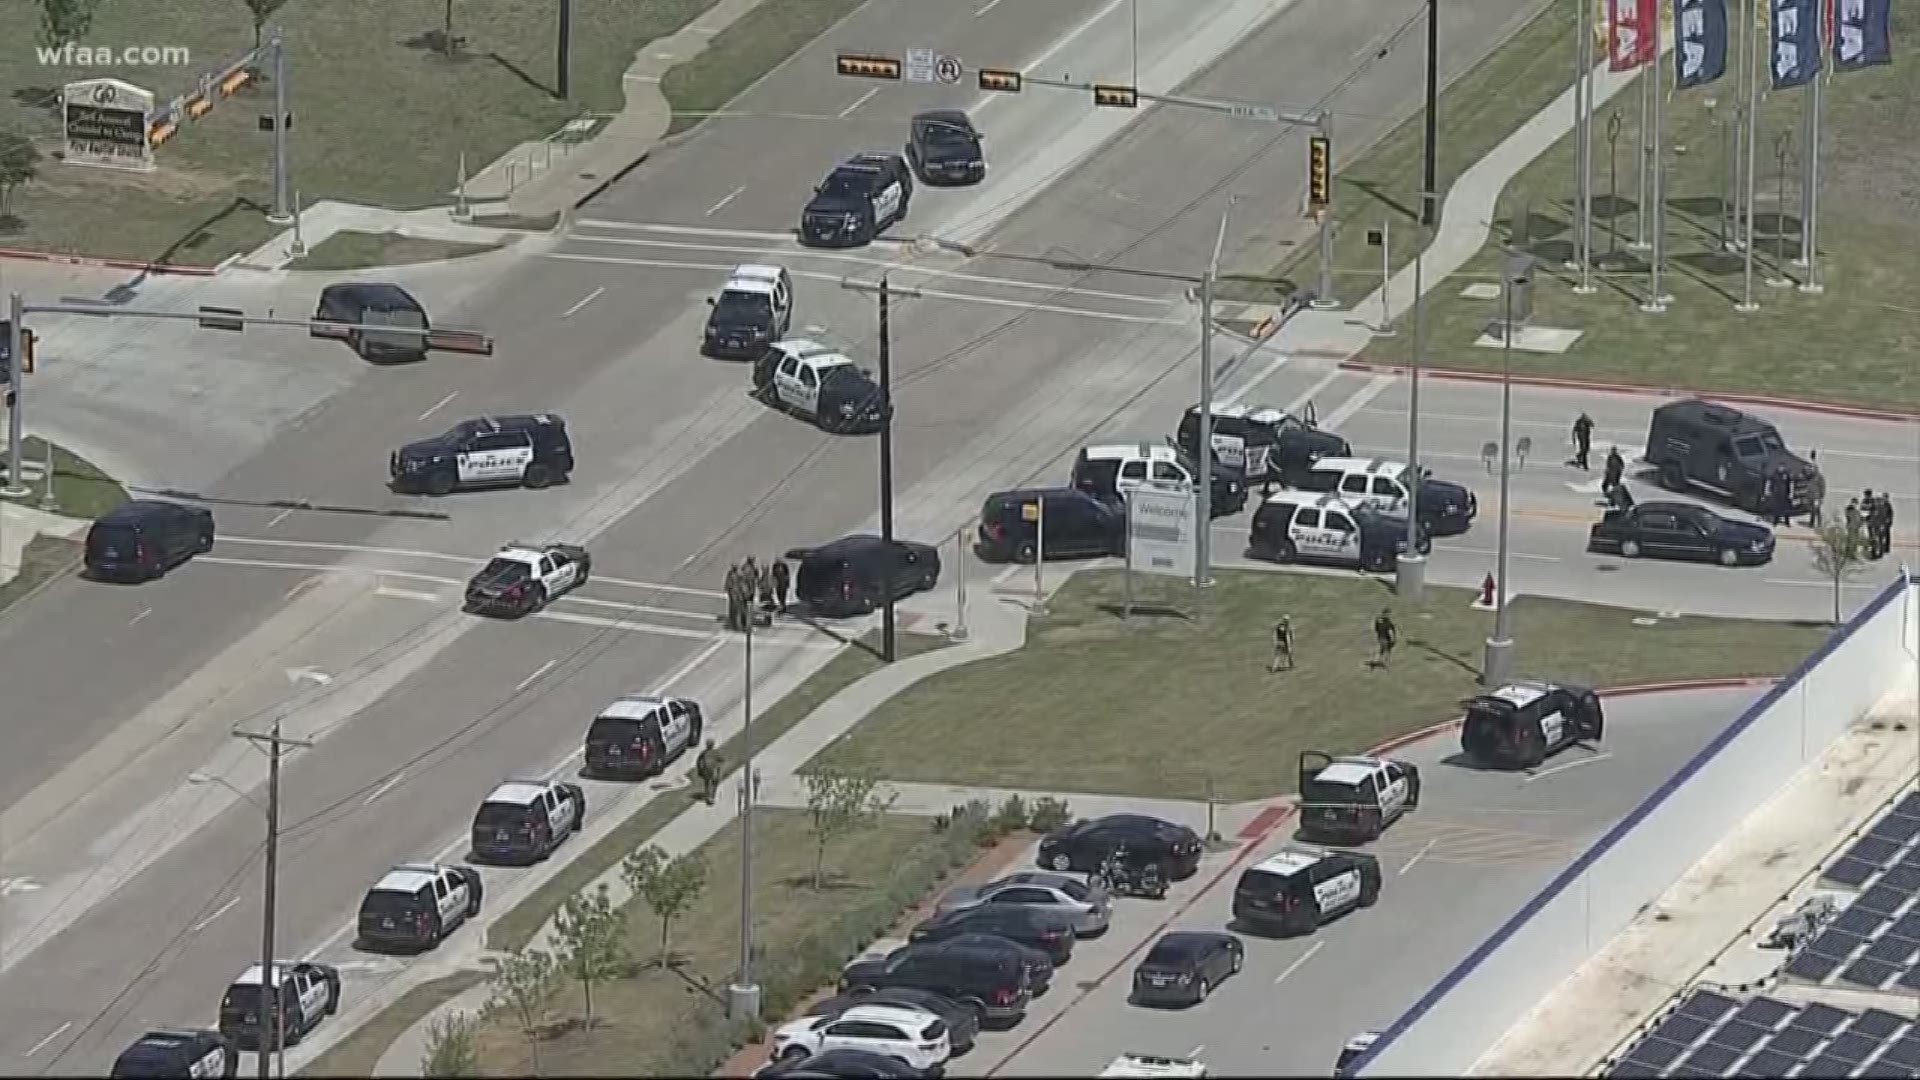 The suspect got into a standoff with SWAT officers near the entrance to the store.